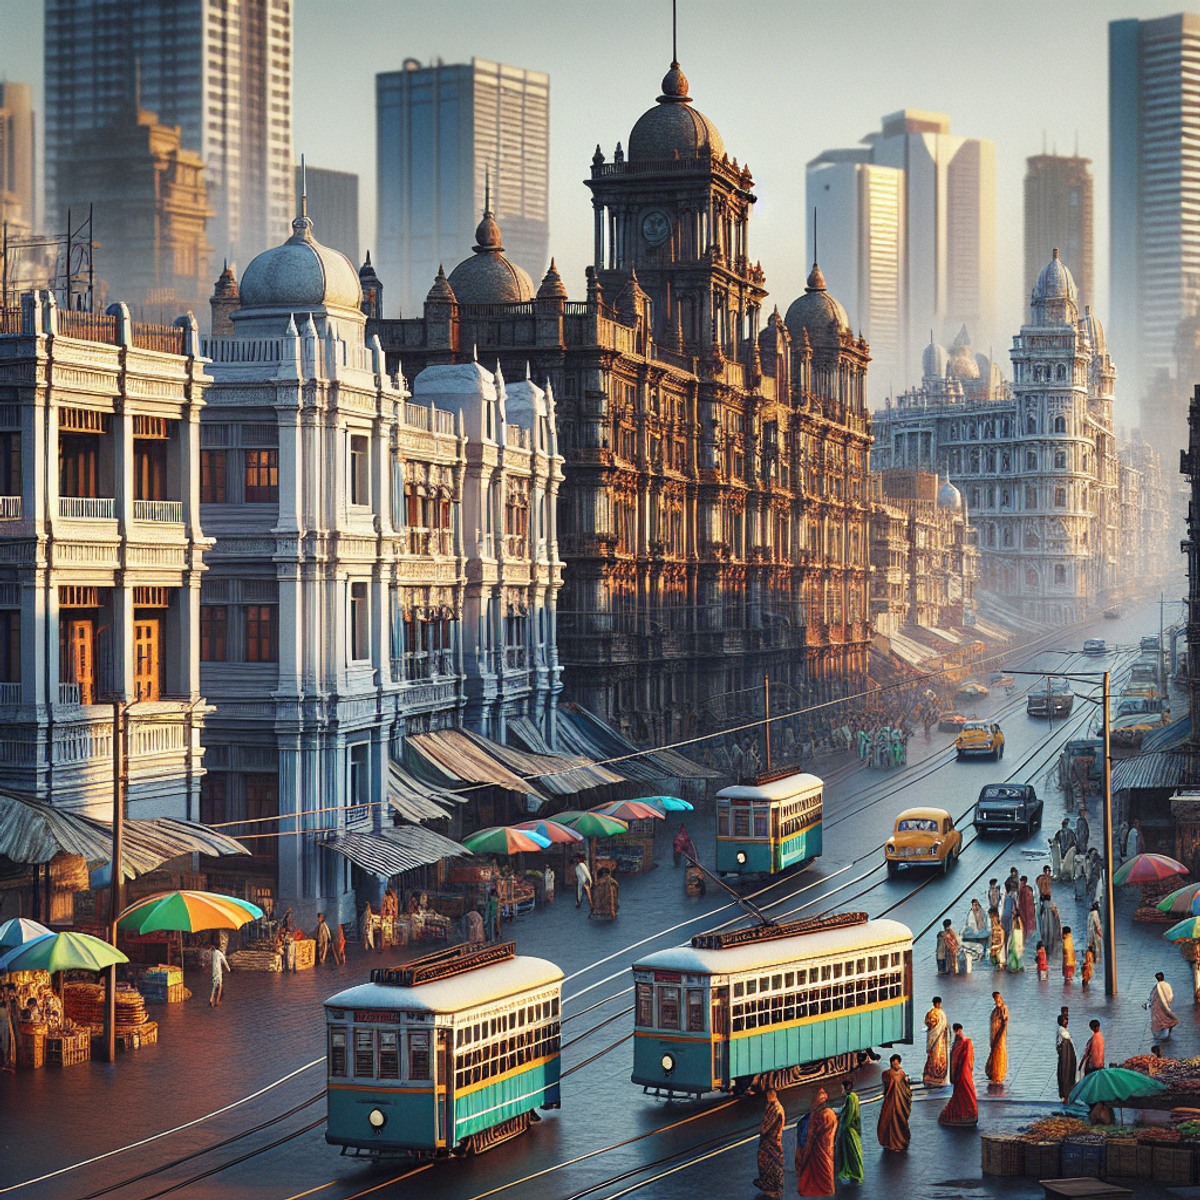 A cityscape of Kolkata, India, featuring a blend of historical and modern architecture, bustling streets, and diverse people.